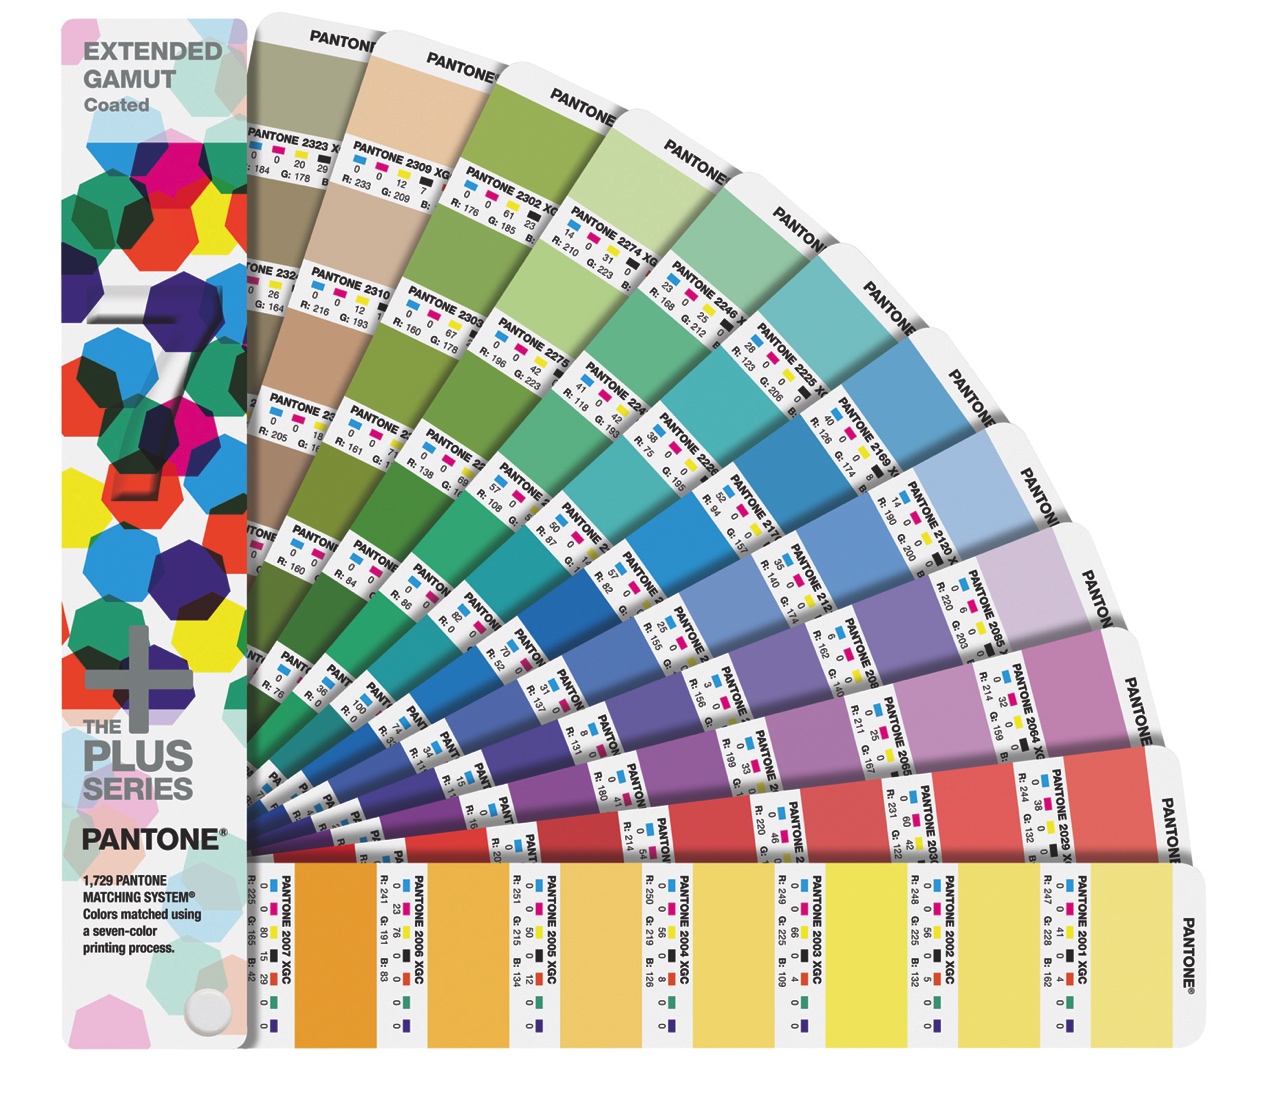 pantone extended color gamut is becoming more popular in printing